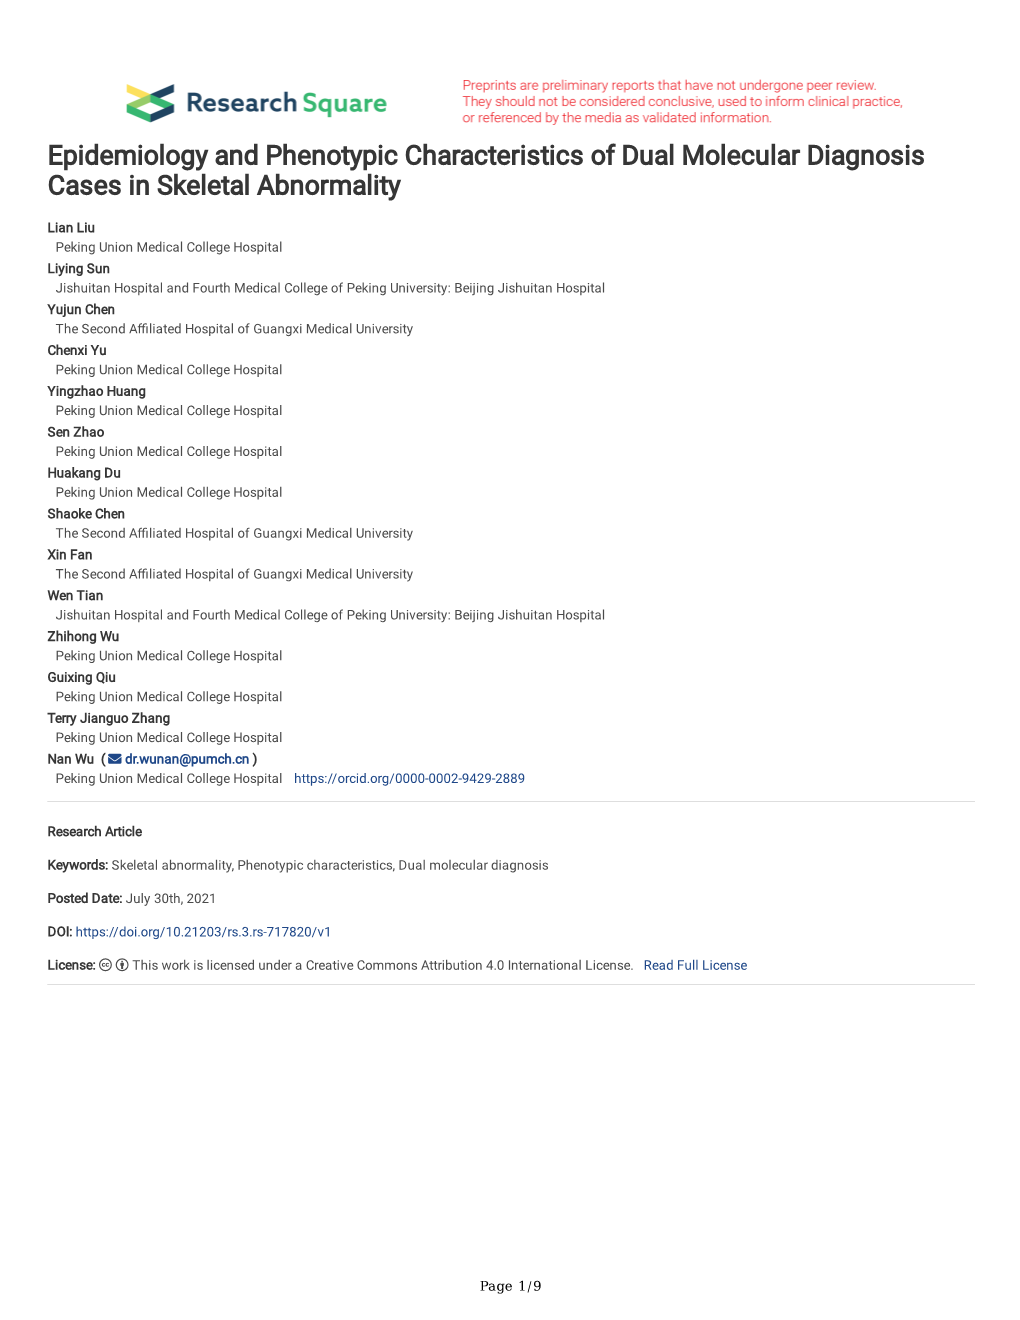 Epidemiology and Phenotypic Characteristics of Dual Molecular Diagnosis Cases in Skeletal Abnormality